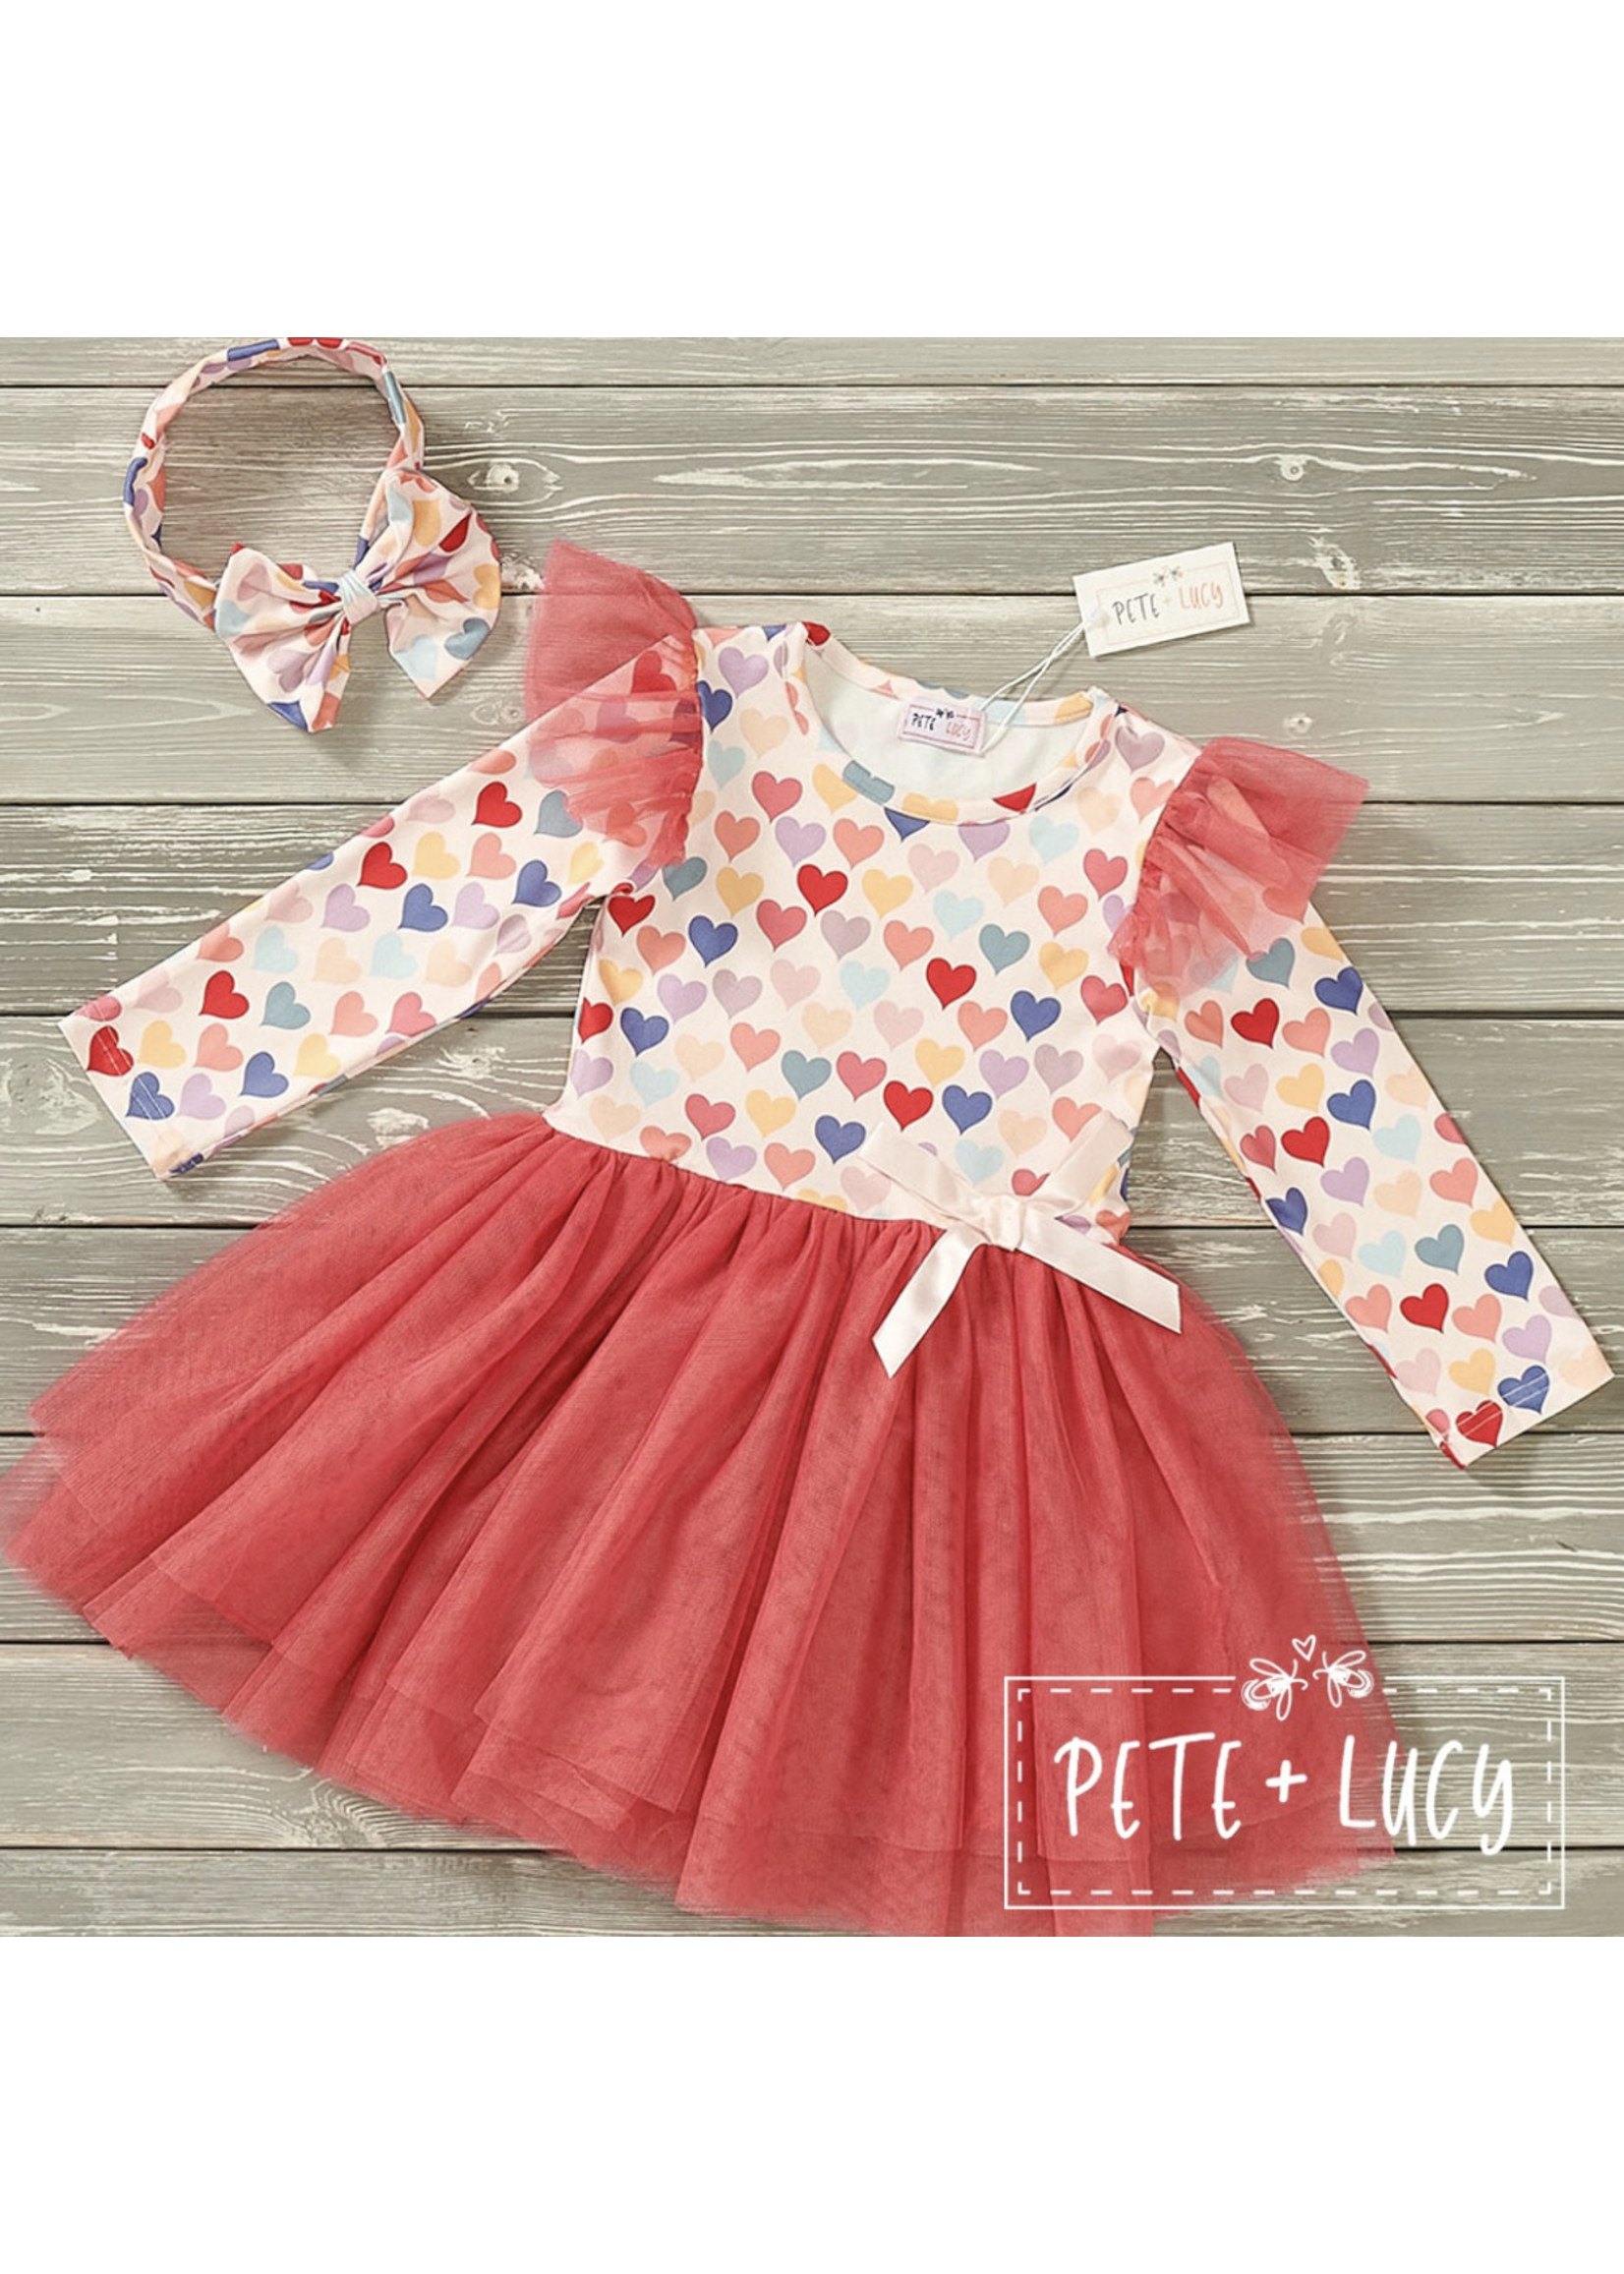 Pete & Lucy Pastel Hearts Tulle Dress